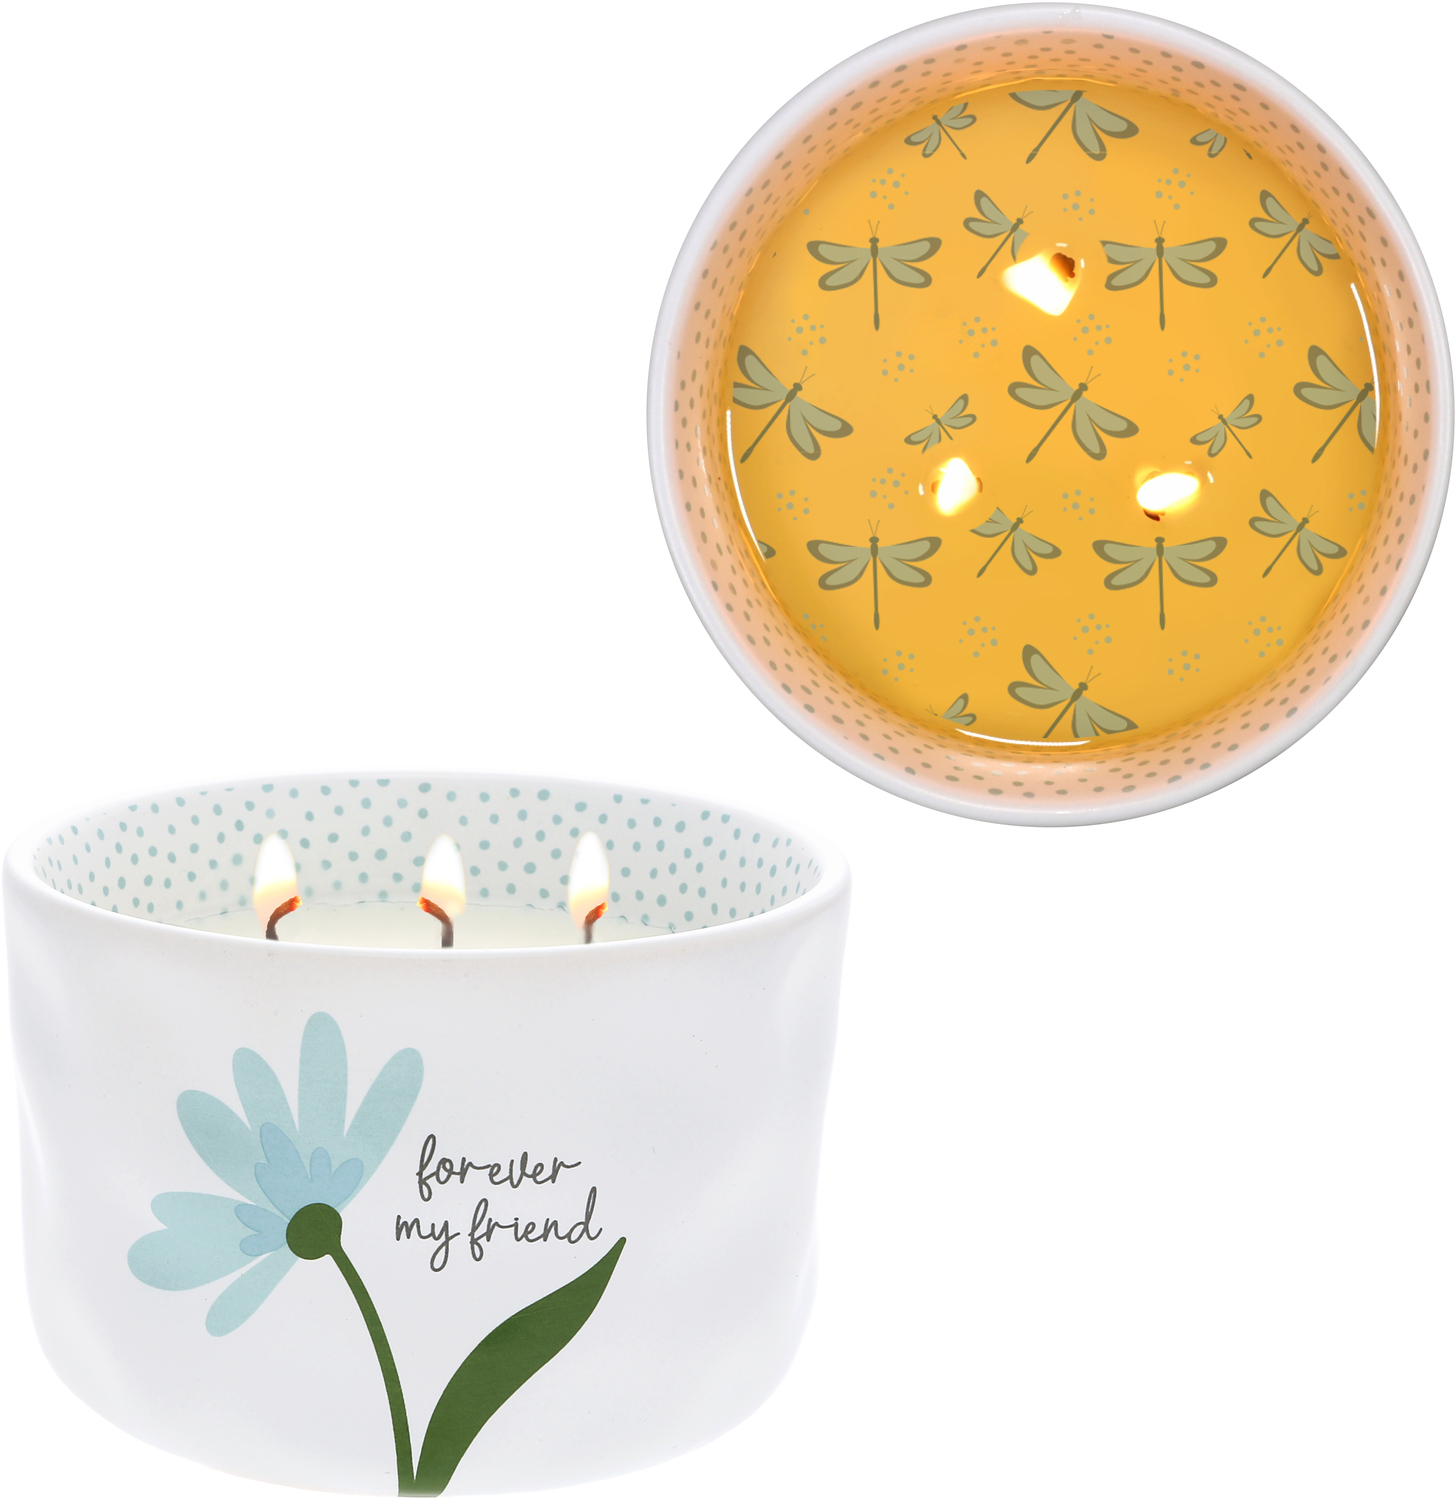 Forever My Friend by Grateful Garden - Forever My Friend - 12 oz - 100% Soy Wax Reveal Triple Wick Candle
Scent: Tranquility